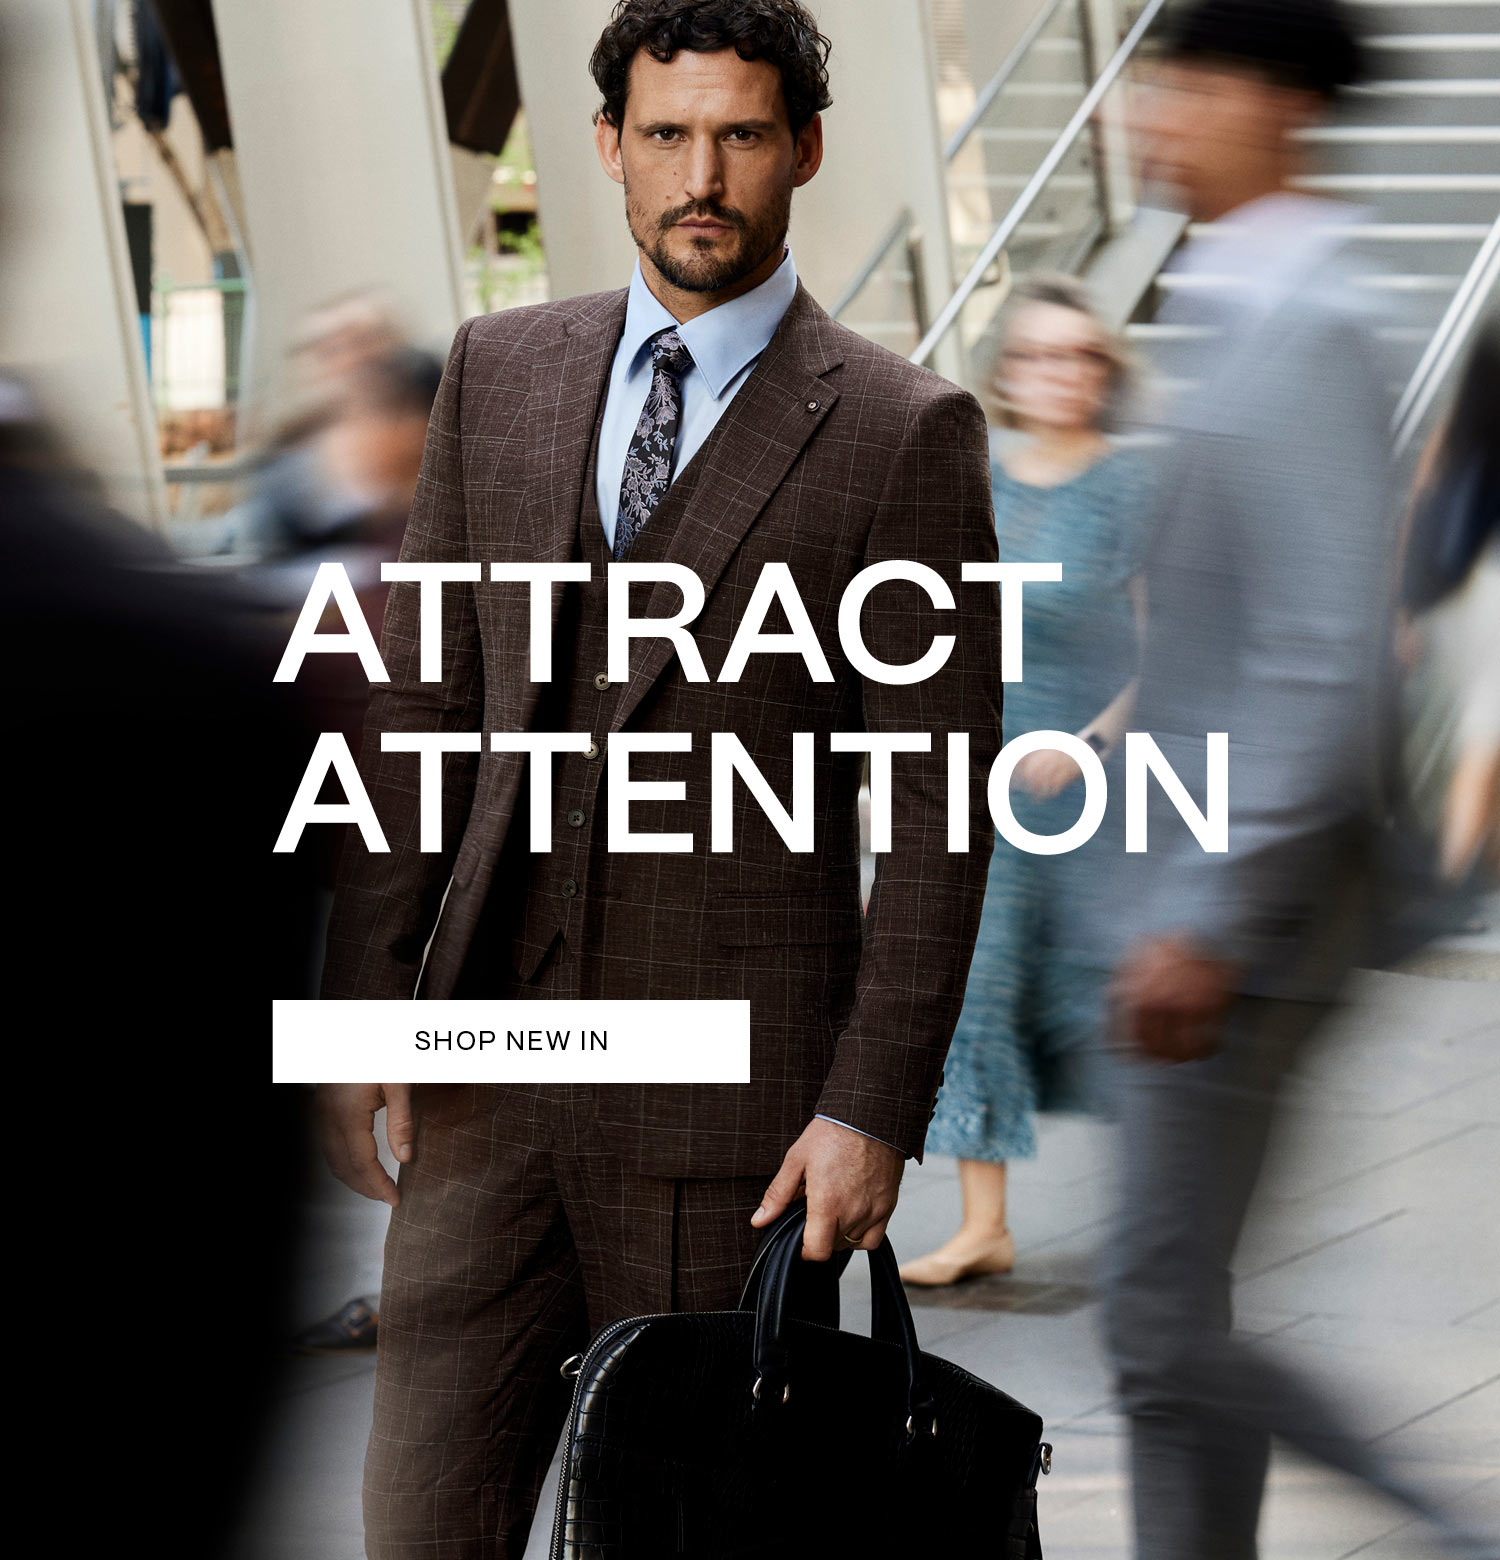 Attract Attention - Shop New In